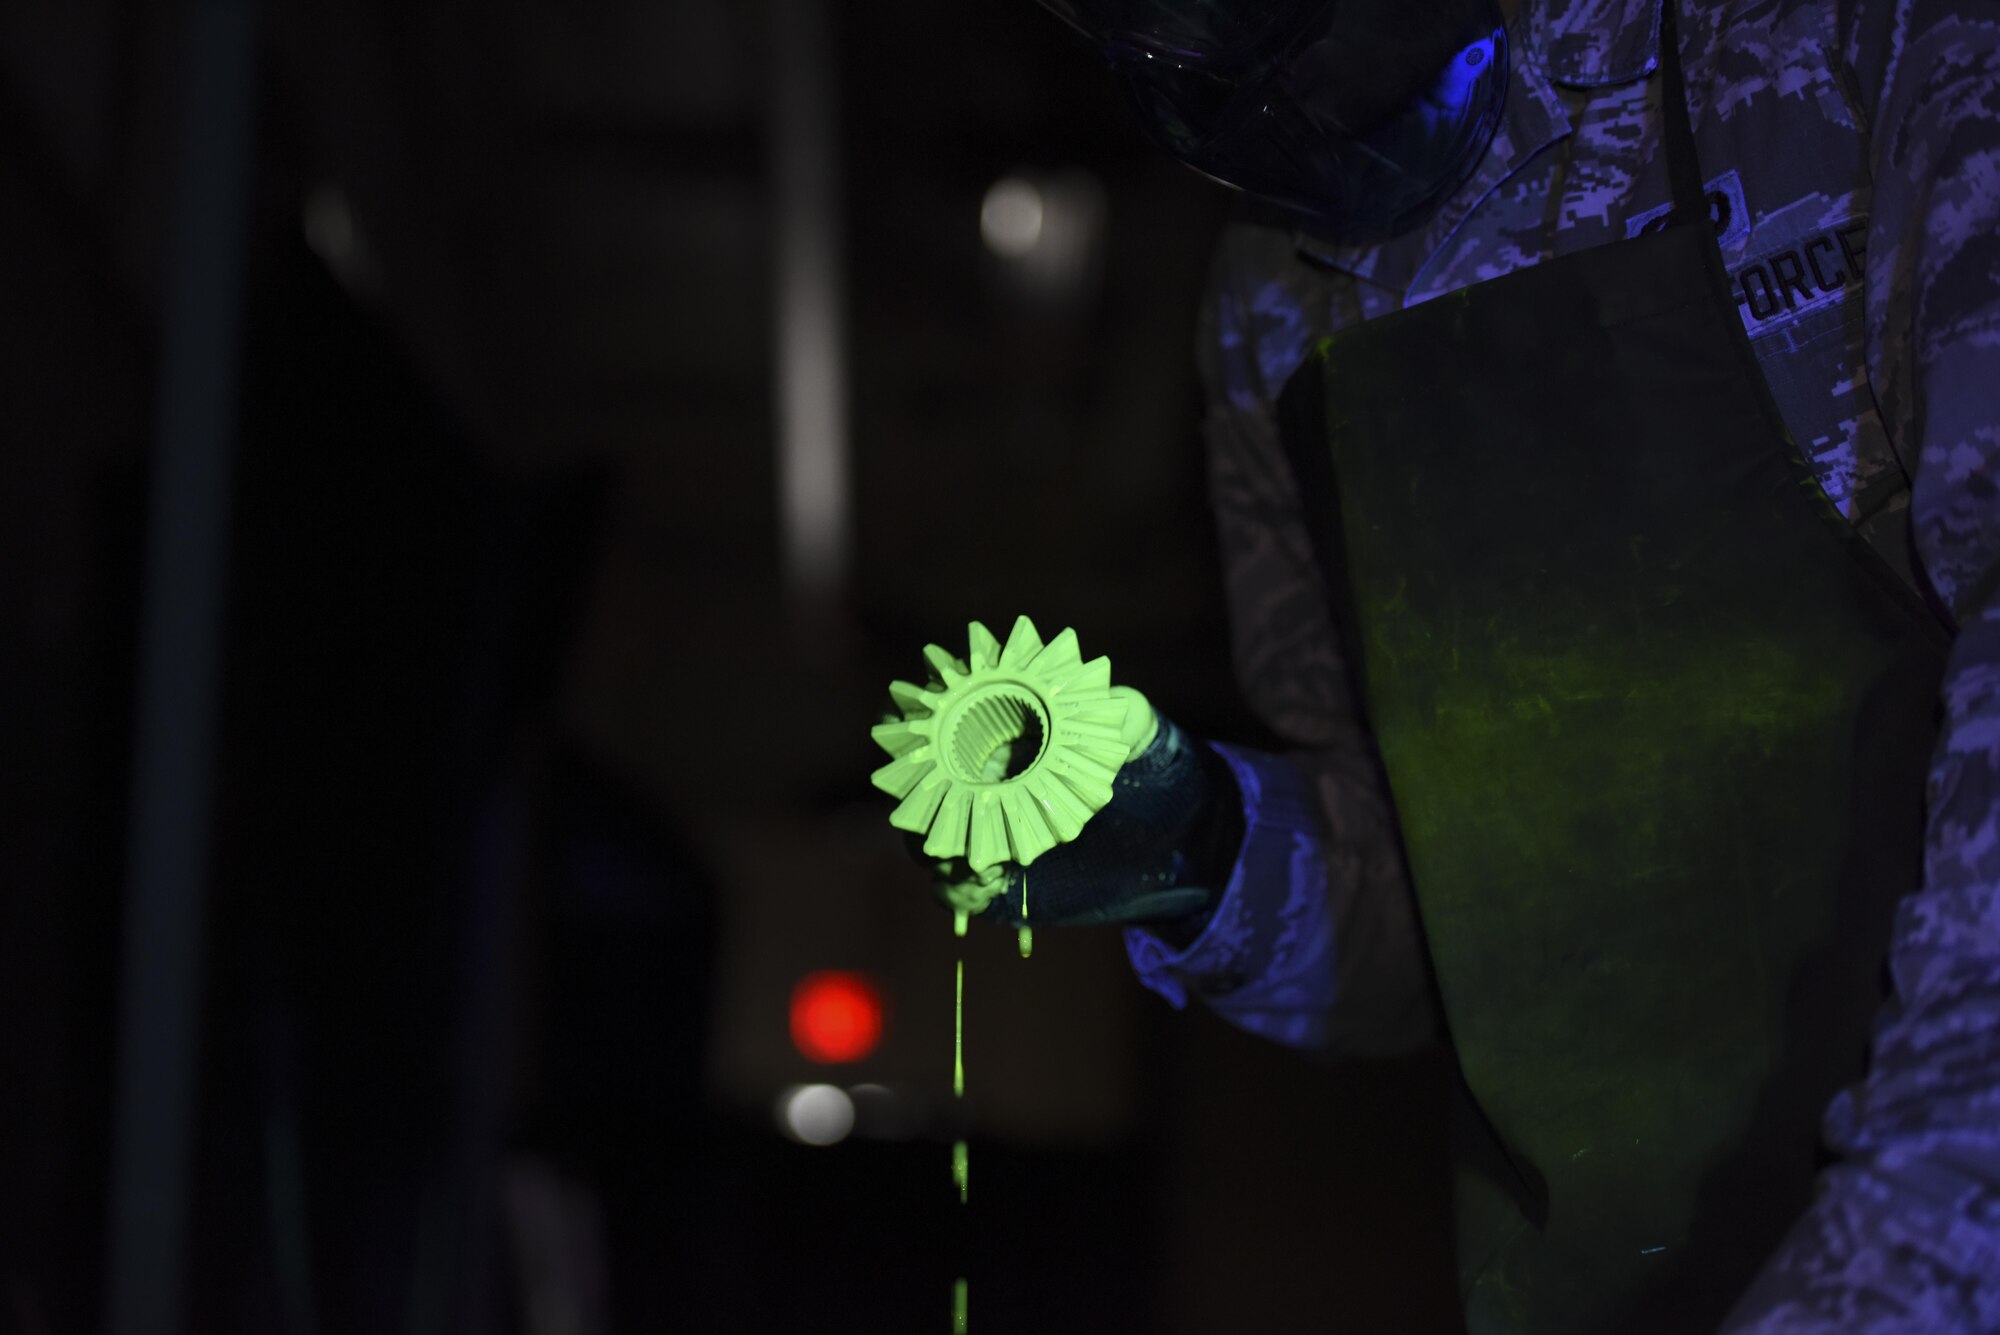 Senior Airman Brett Gyurnek, 437th Maintenance Squadron Non-Destructive Inspection technician, retrieves a core reverser gear from a vat of fluorescent penetrant during a deficiency inspection at Joint Base Charleston, S.C. July 10, 2017. Fluorescent penetrant testing is a reliable way to illuminate fractures on the surface of damaged aircraft parts. It is done by submerging the part in a fluorescent liquid and allowing the dye to penetrate into any cracks. The liquid is then rinsed off and placed in a developing agent which makes the fluorescent liquid illuminate brighter under an ultraviolet light. The part is then placed under an ultraviolet light and, if cracks are present, they will light up making the deficiency more visible.